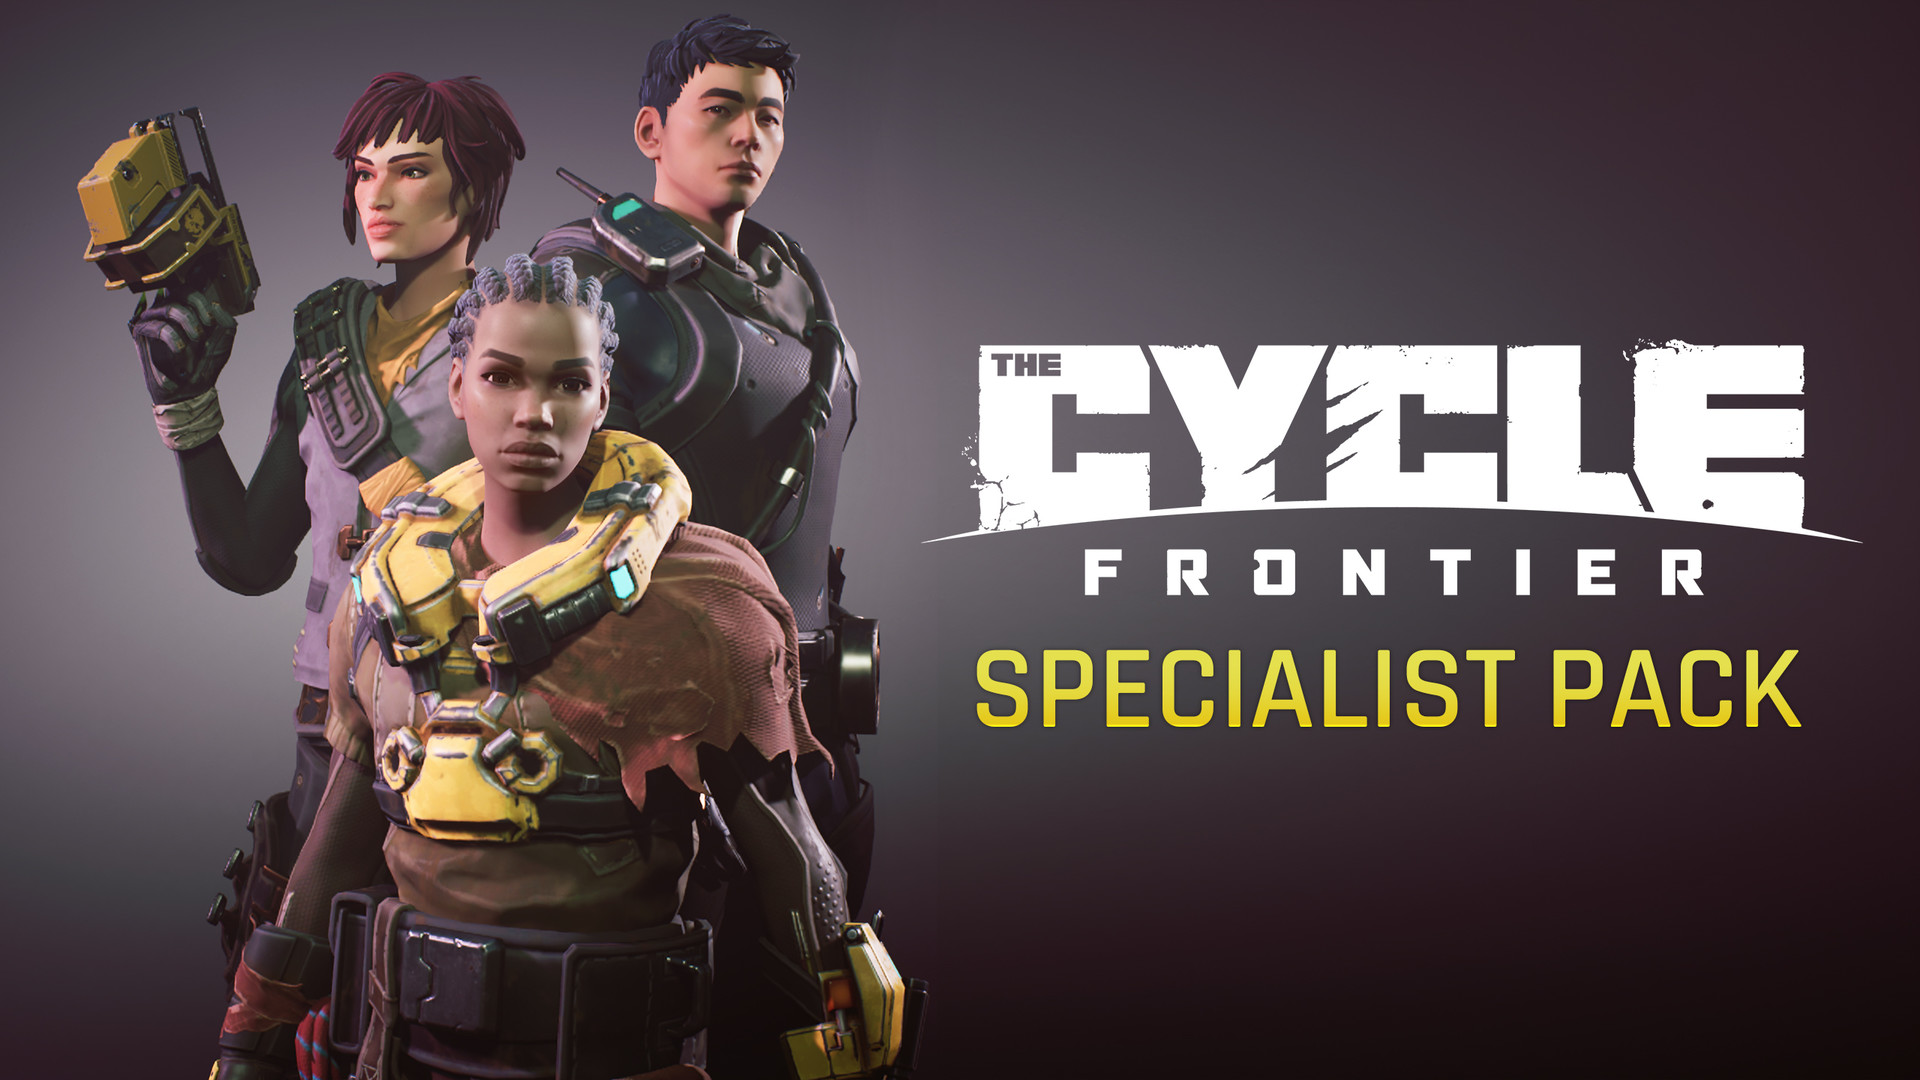 The Cycle: Frontier - Specialist Pack DLC Steam CD Key, $5.64